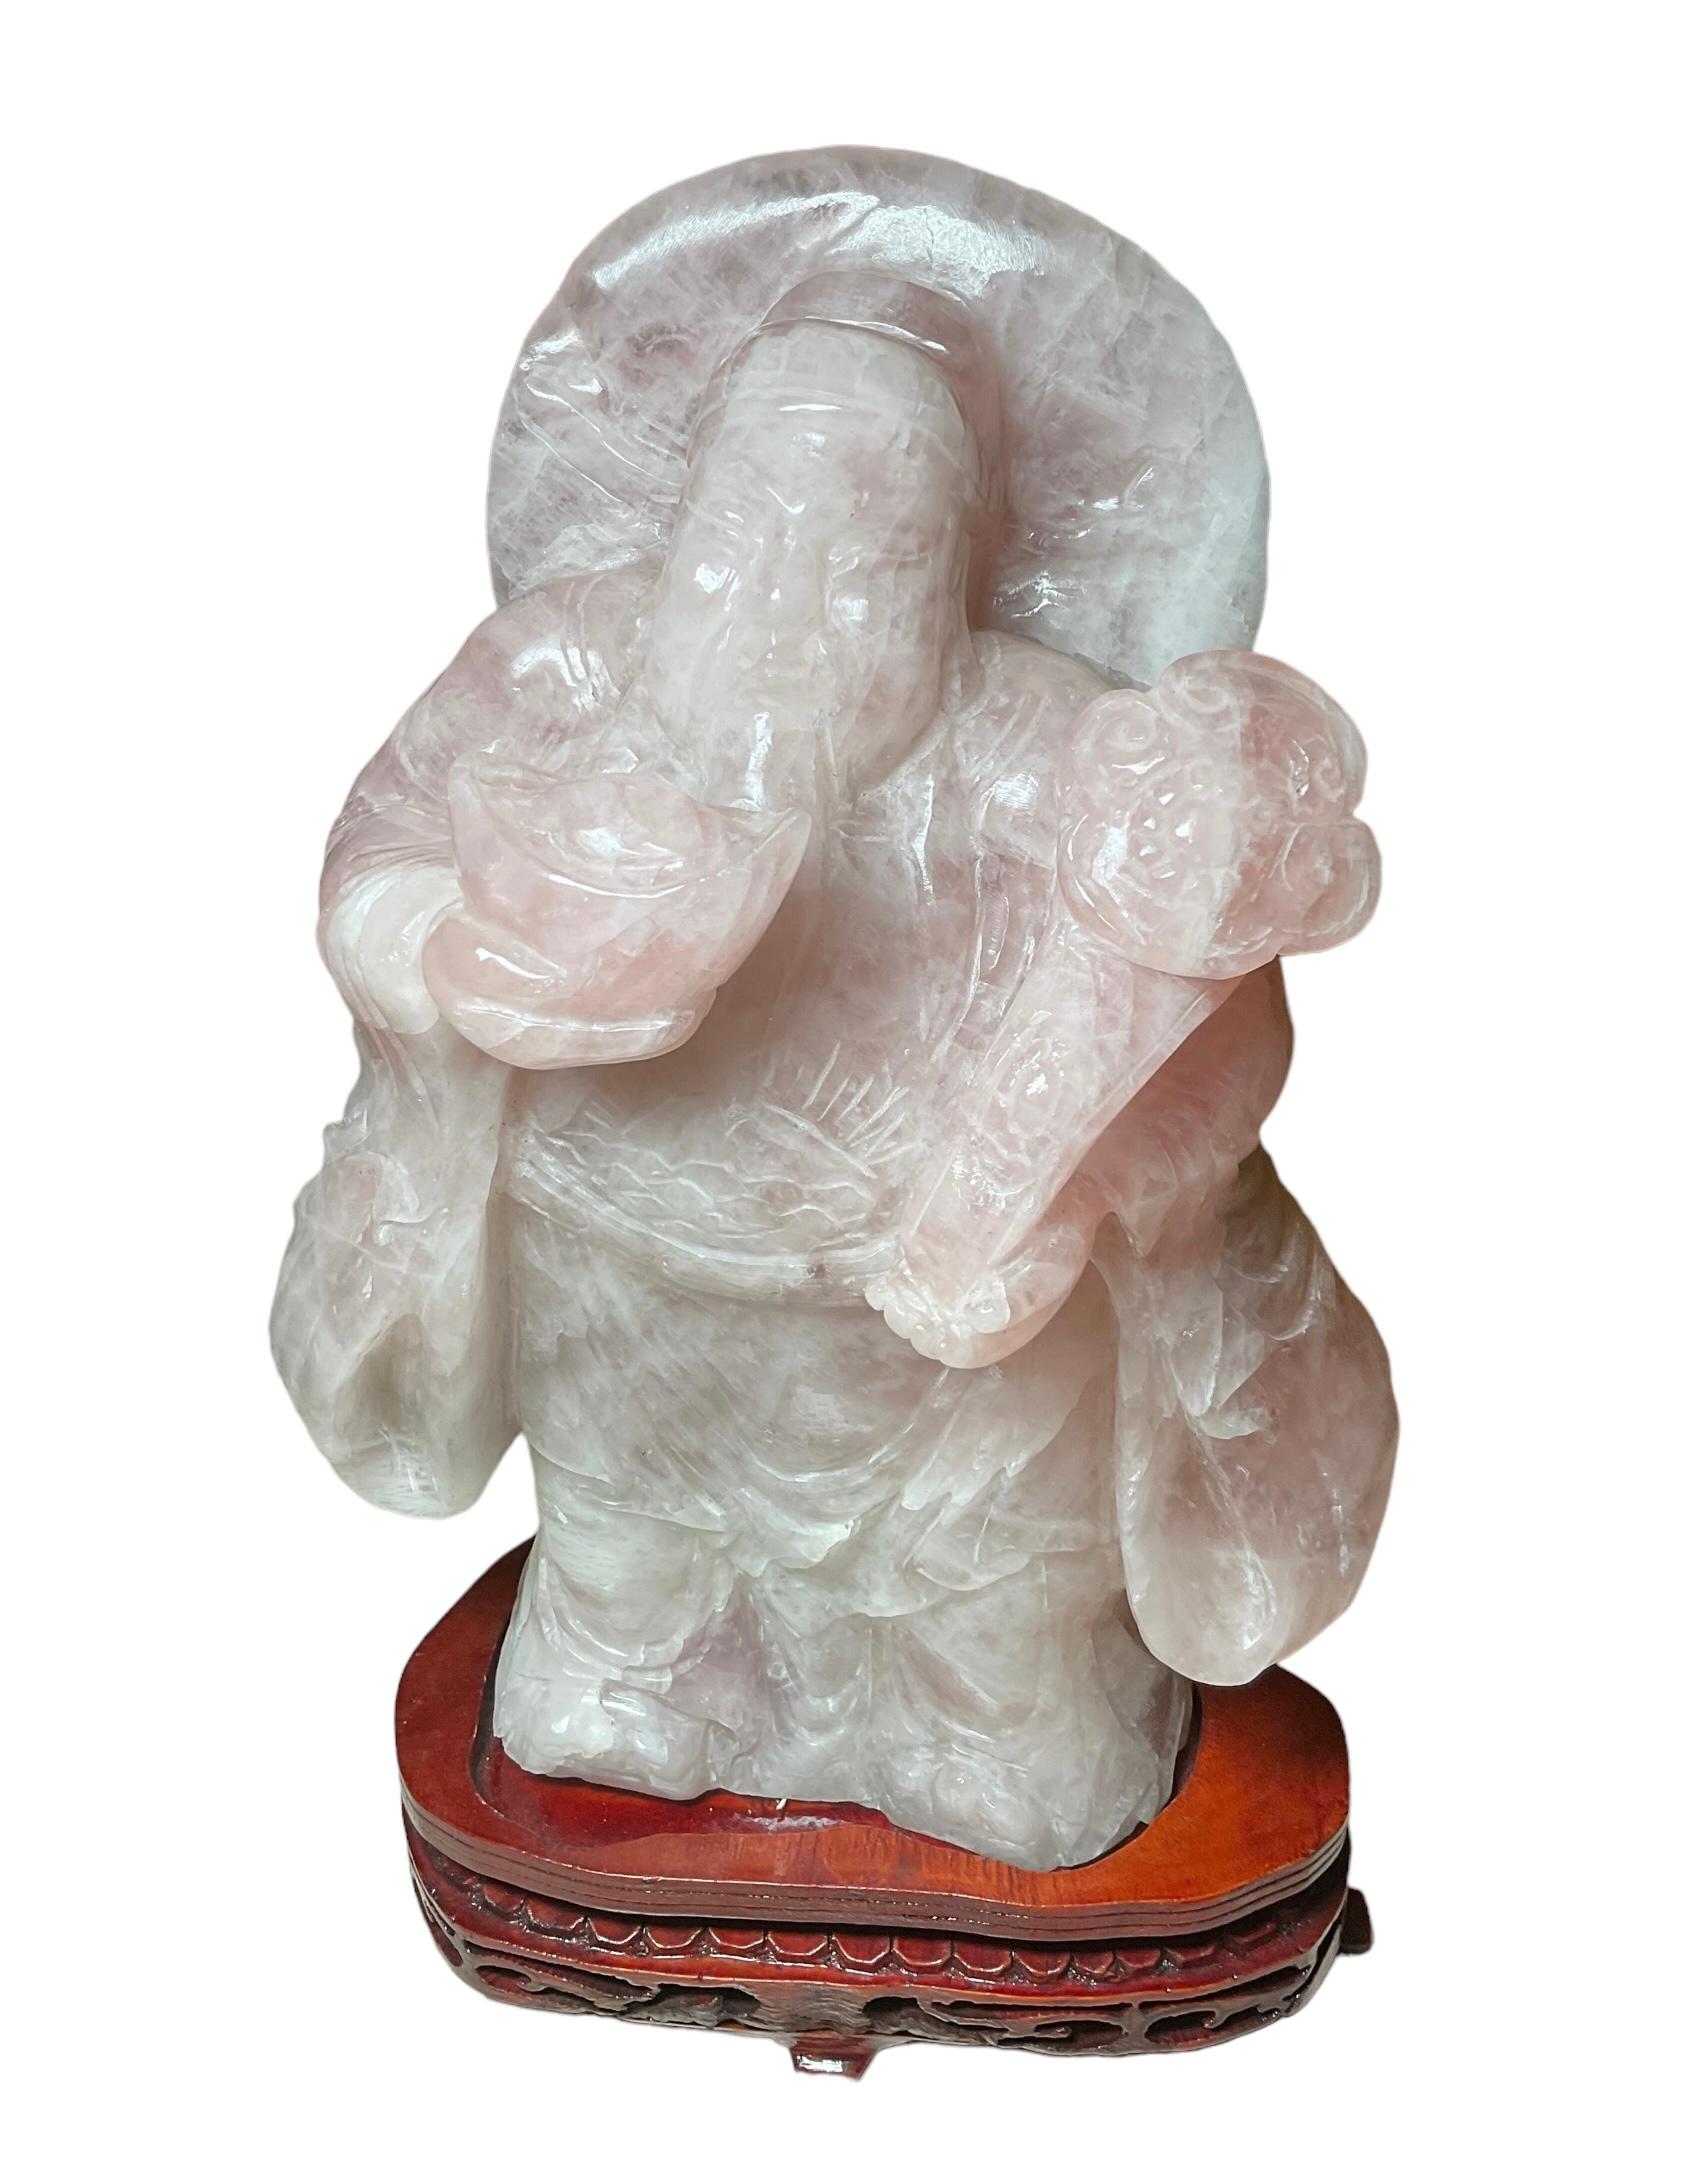 20th Century Chinese Rose Quartz Sculpture of a Chinese Man Holding a Ruyi Scepter For Sale